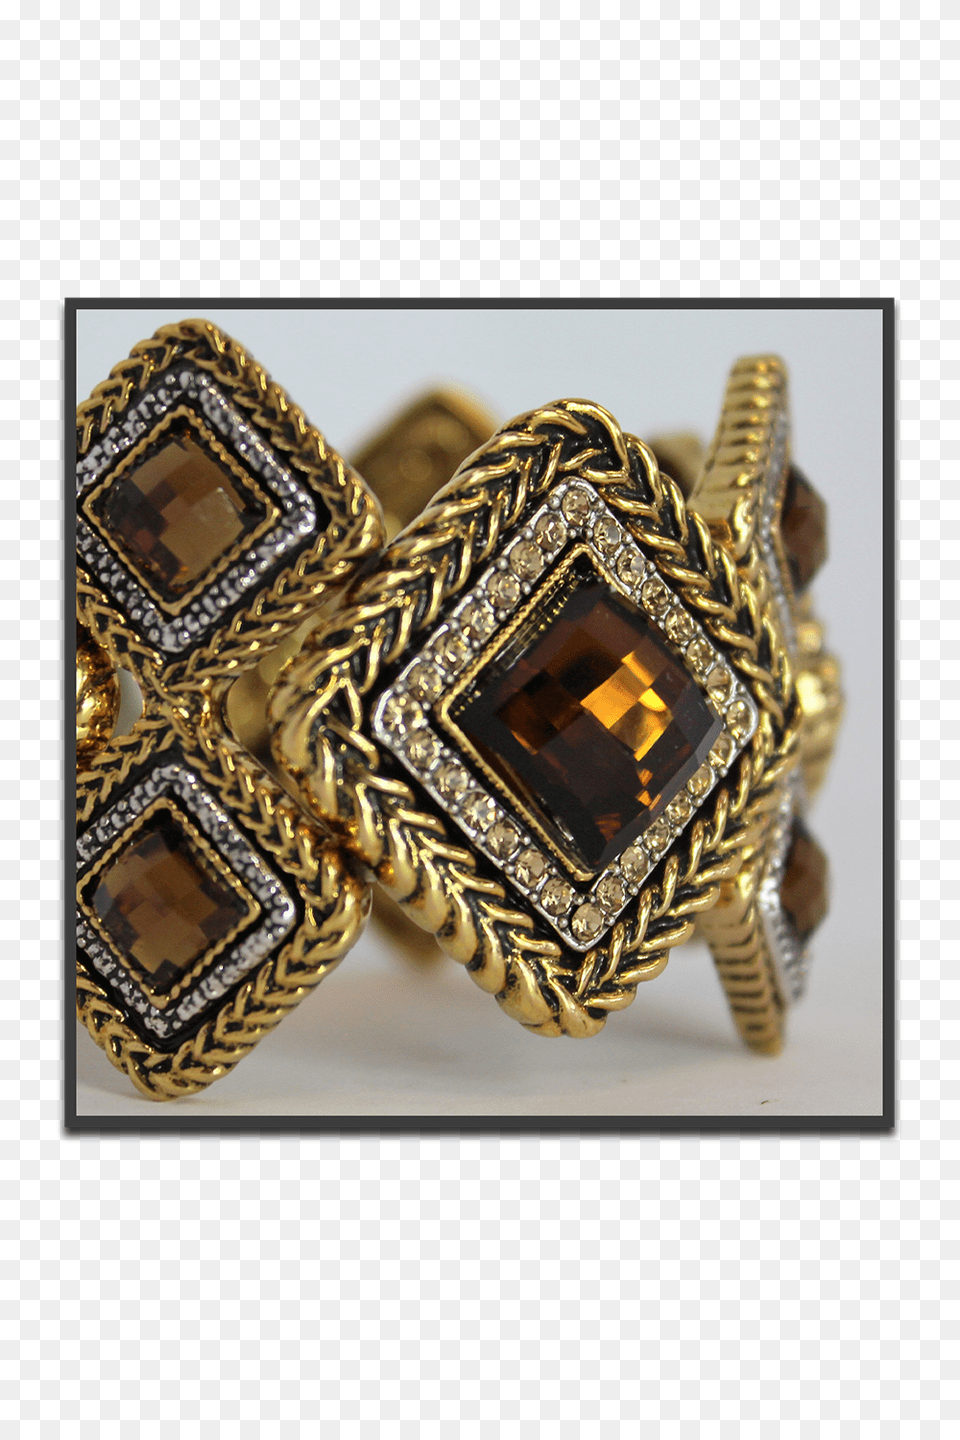 Untitled 1 0009 Layer 9 Gemstone, Accessories, Jewelry, Cuff, Gold Png Image